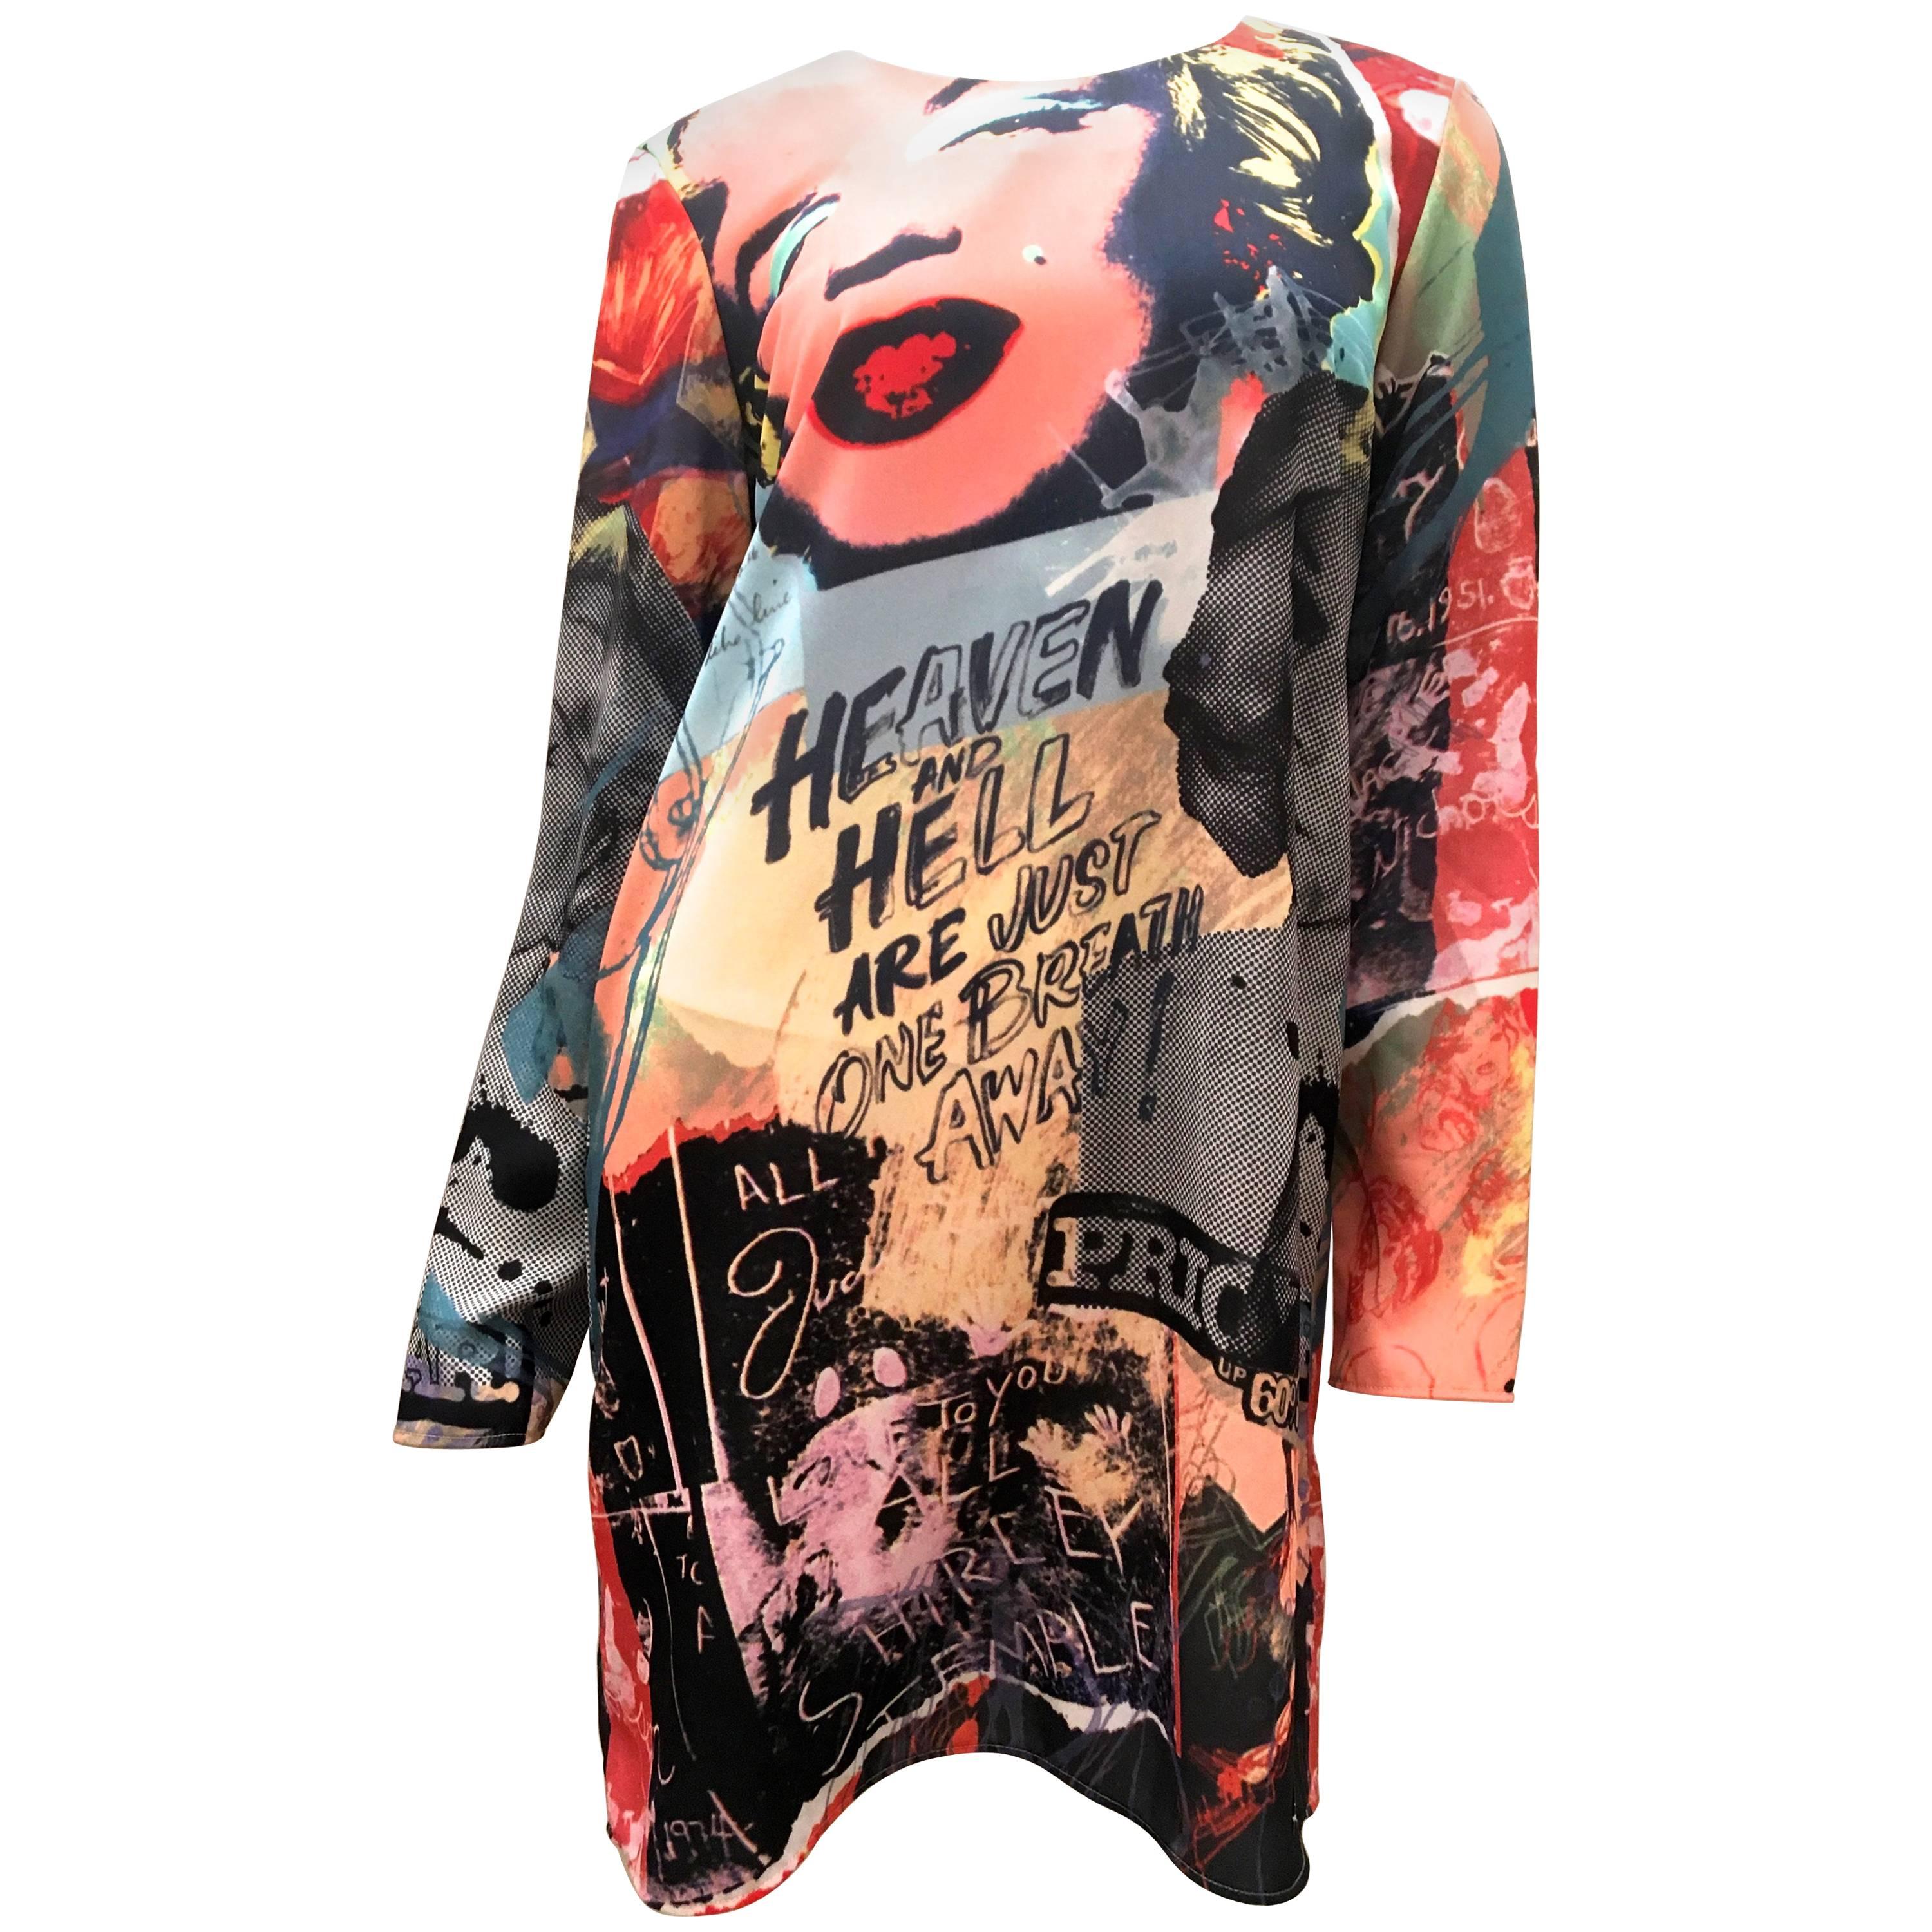 New Andy Warhol Dress - Marilyn Monroe - Rare For Sale